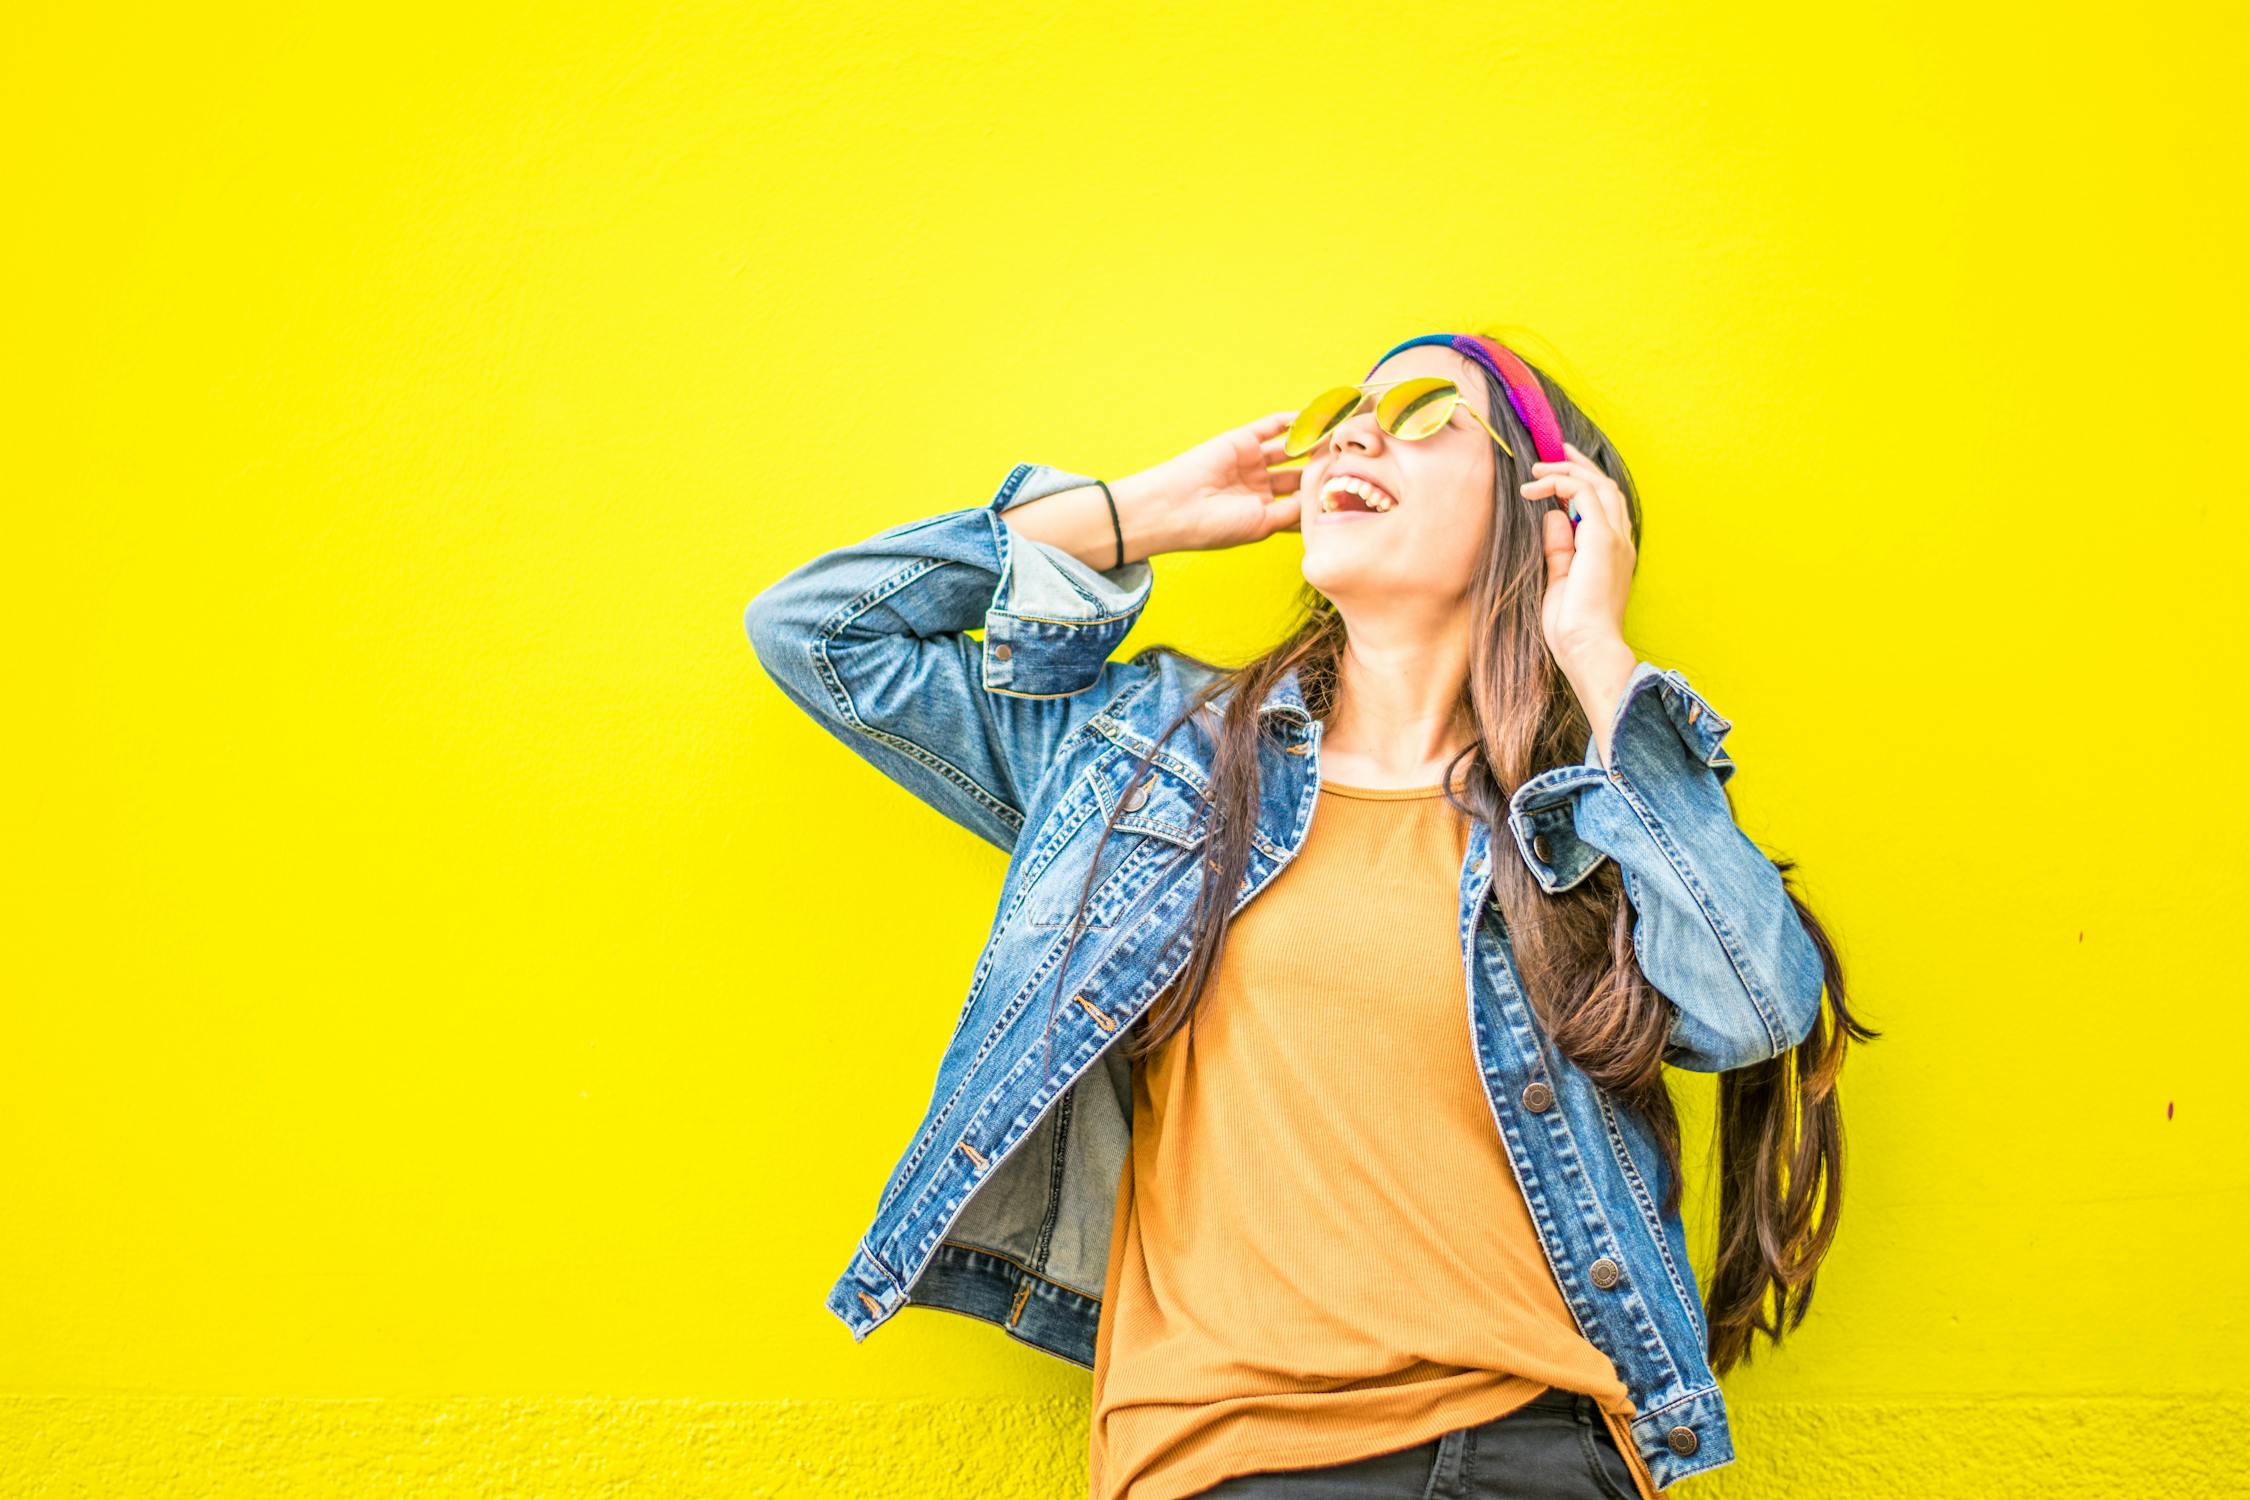 Jacket- Photo by juan mendez from Pexels: https://www.pexels.com/photo/smiling-woman-looking-upright-standing-against-yellow-wall-1536619/